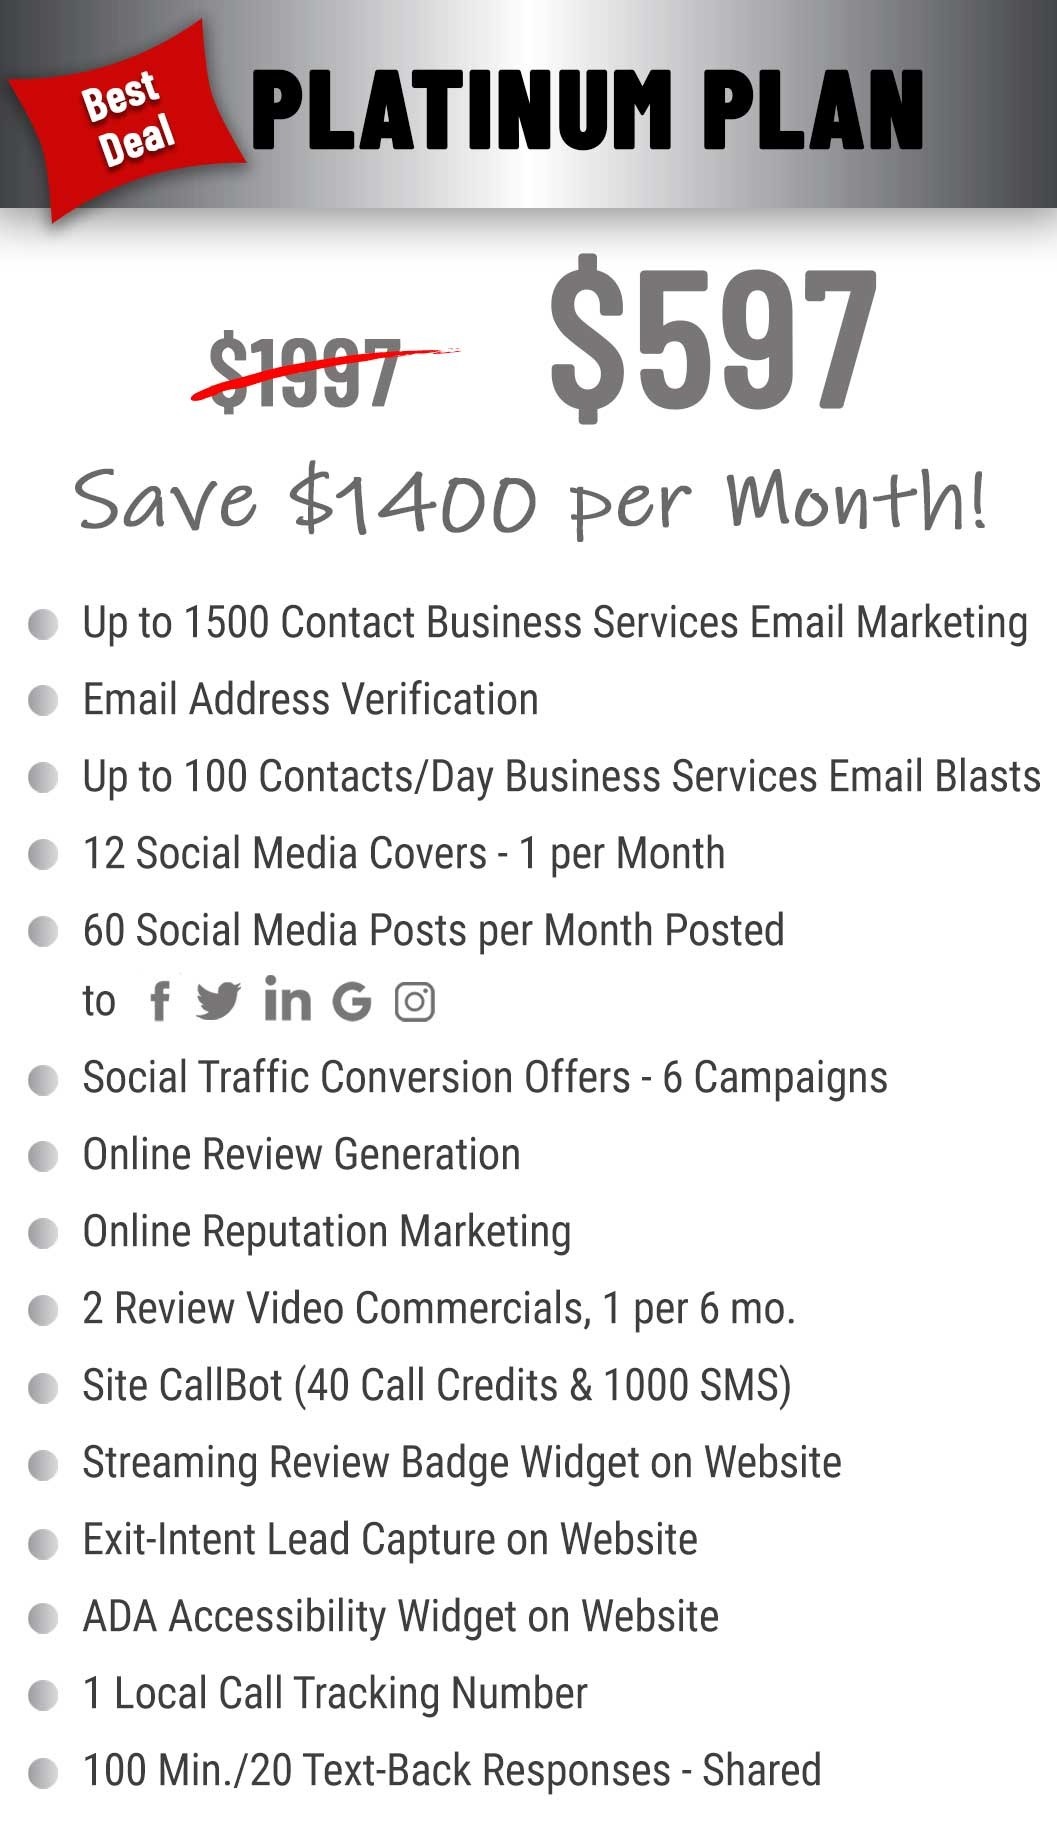 platinum plan $597 per month pricing and features for business services.